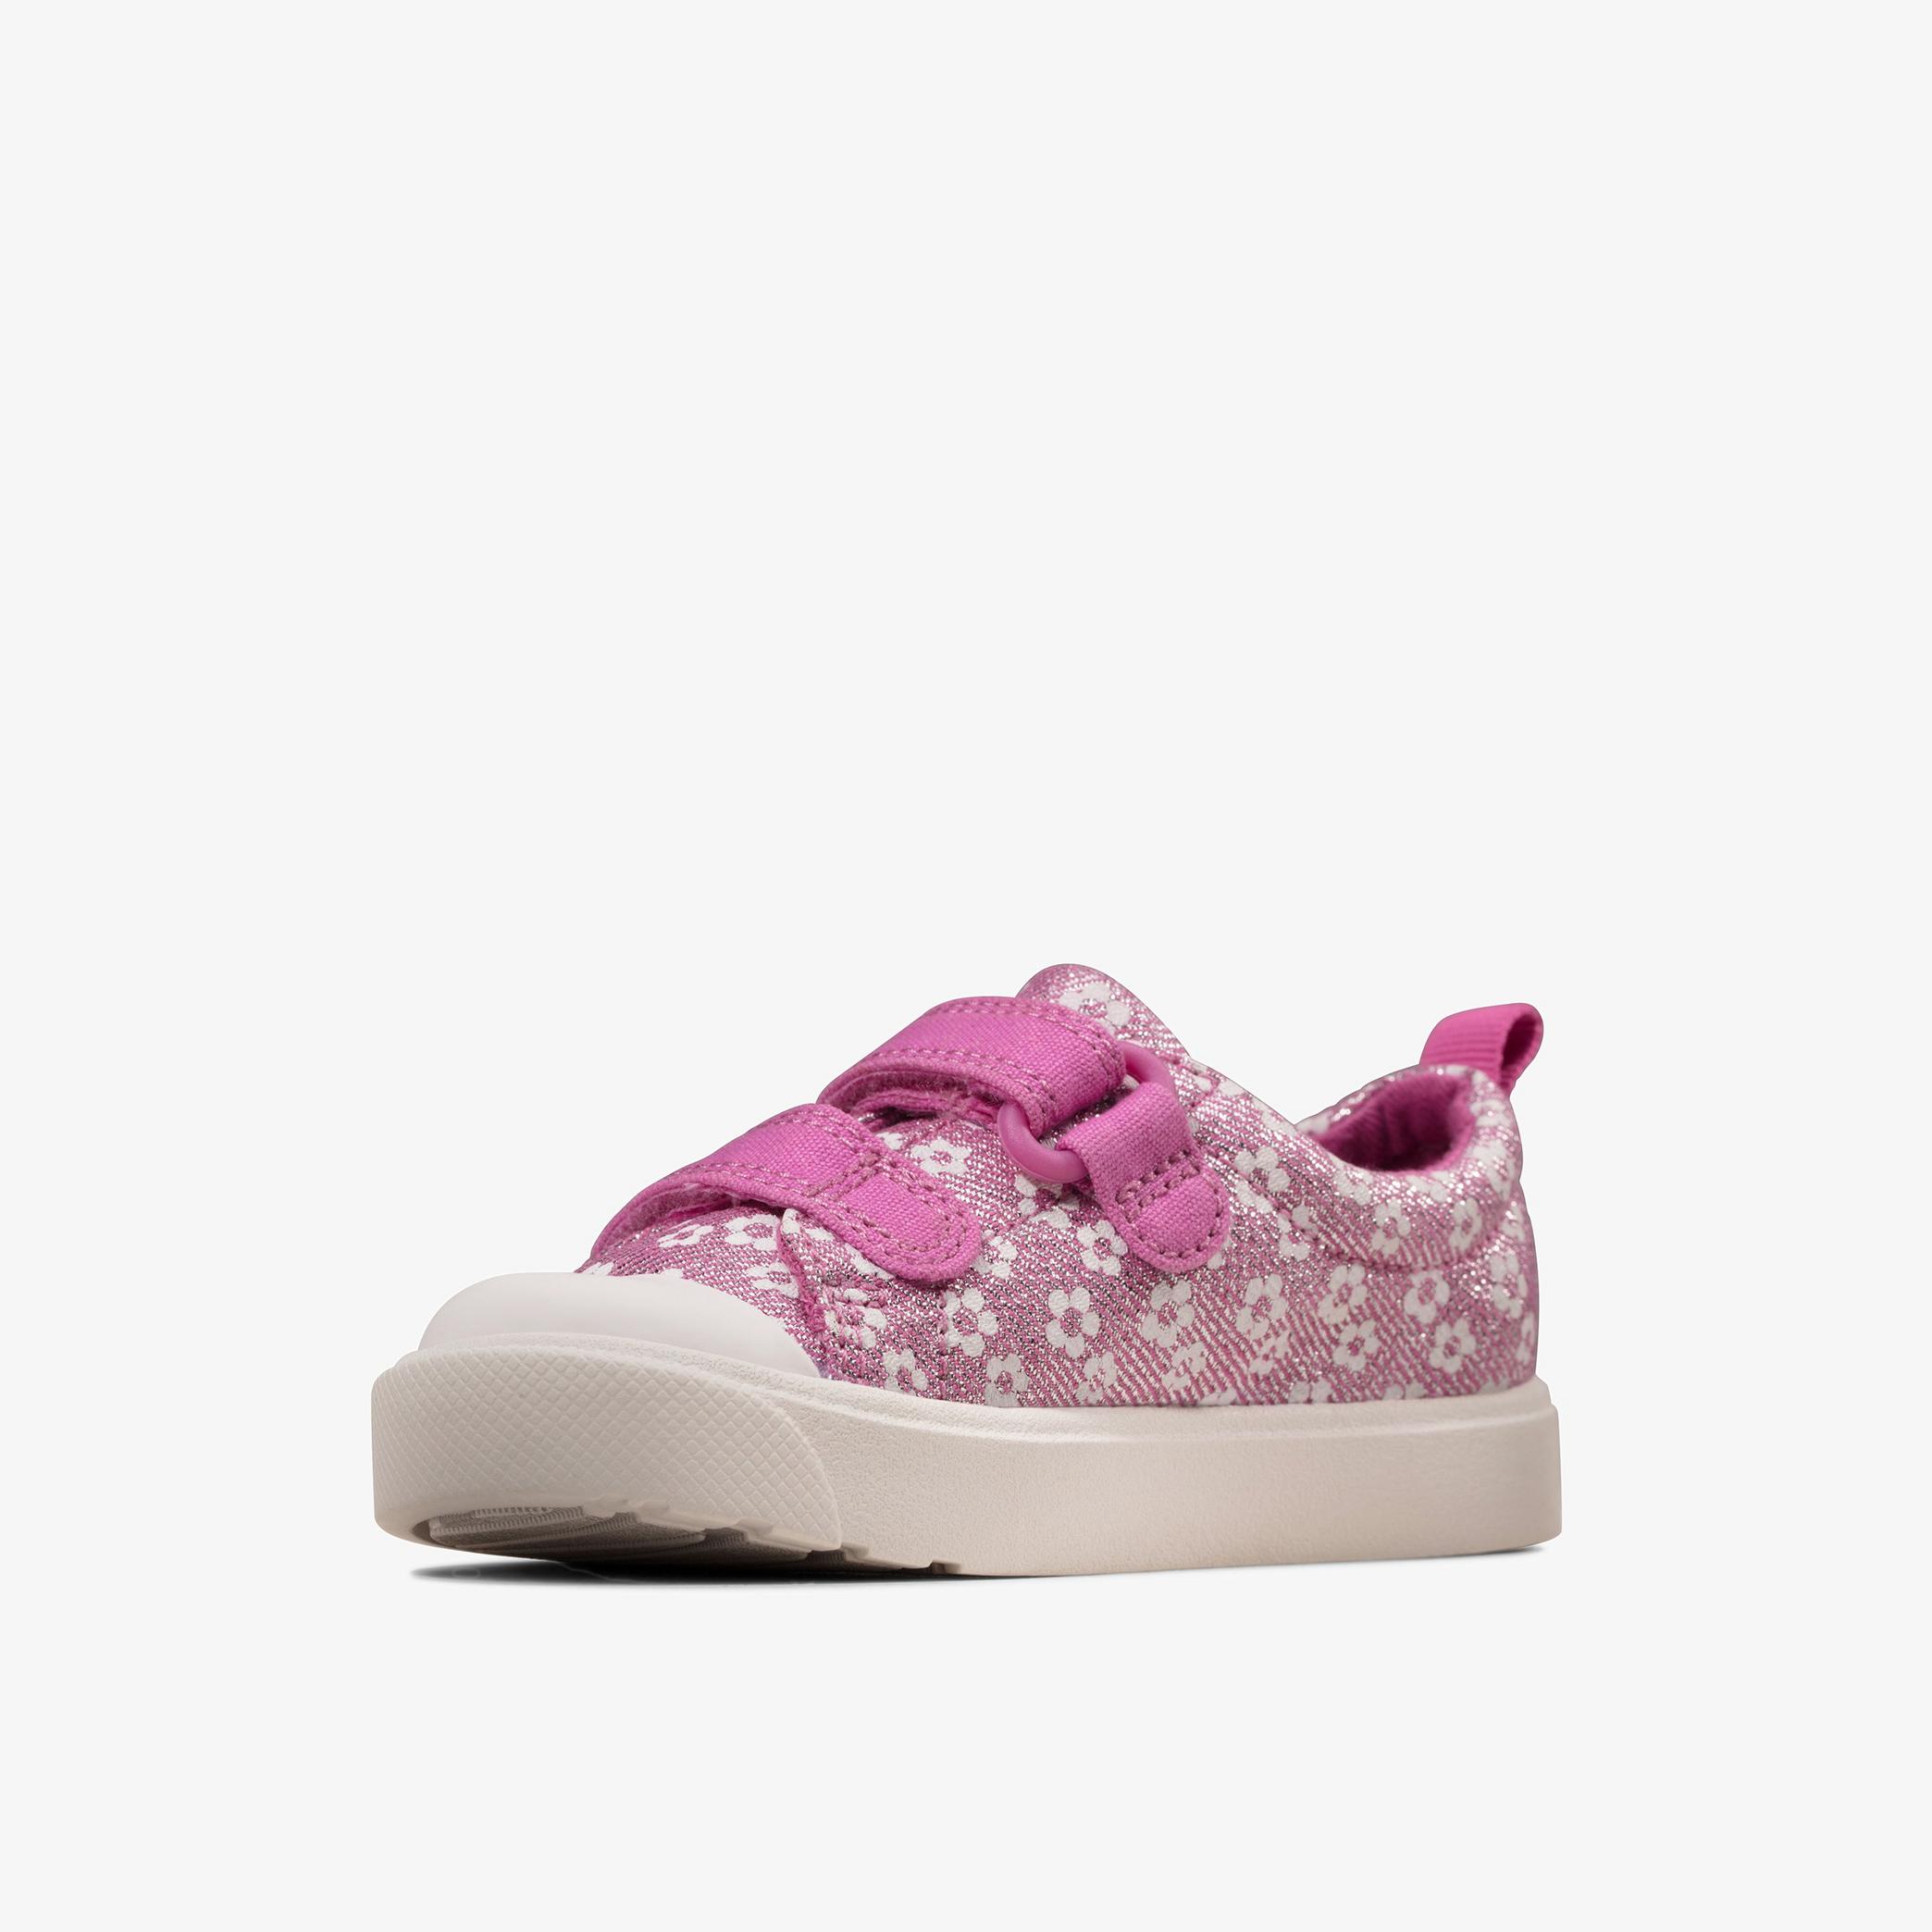 GIRLS City Bright Toddler Pink Floral Canvas | Clarks Outlet